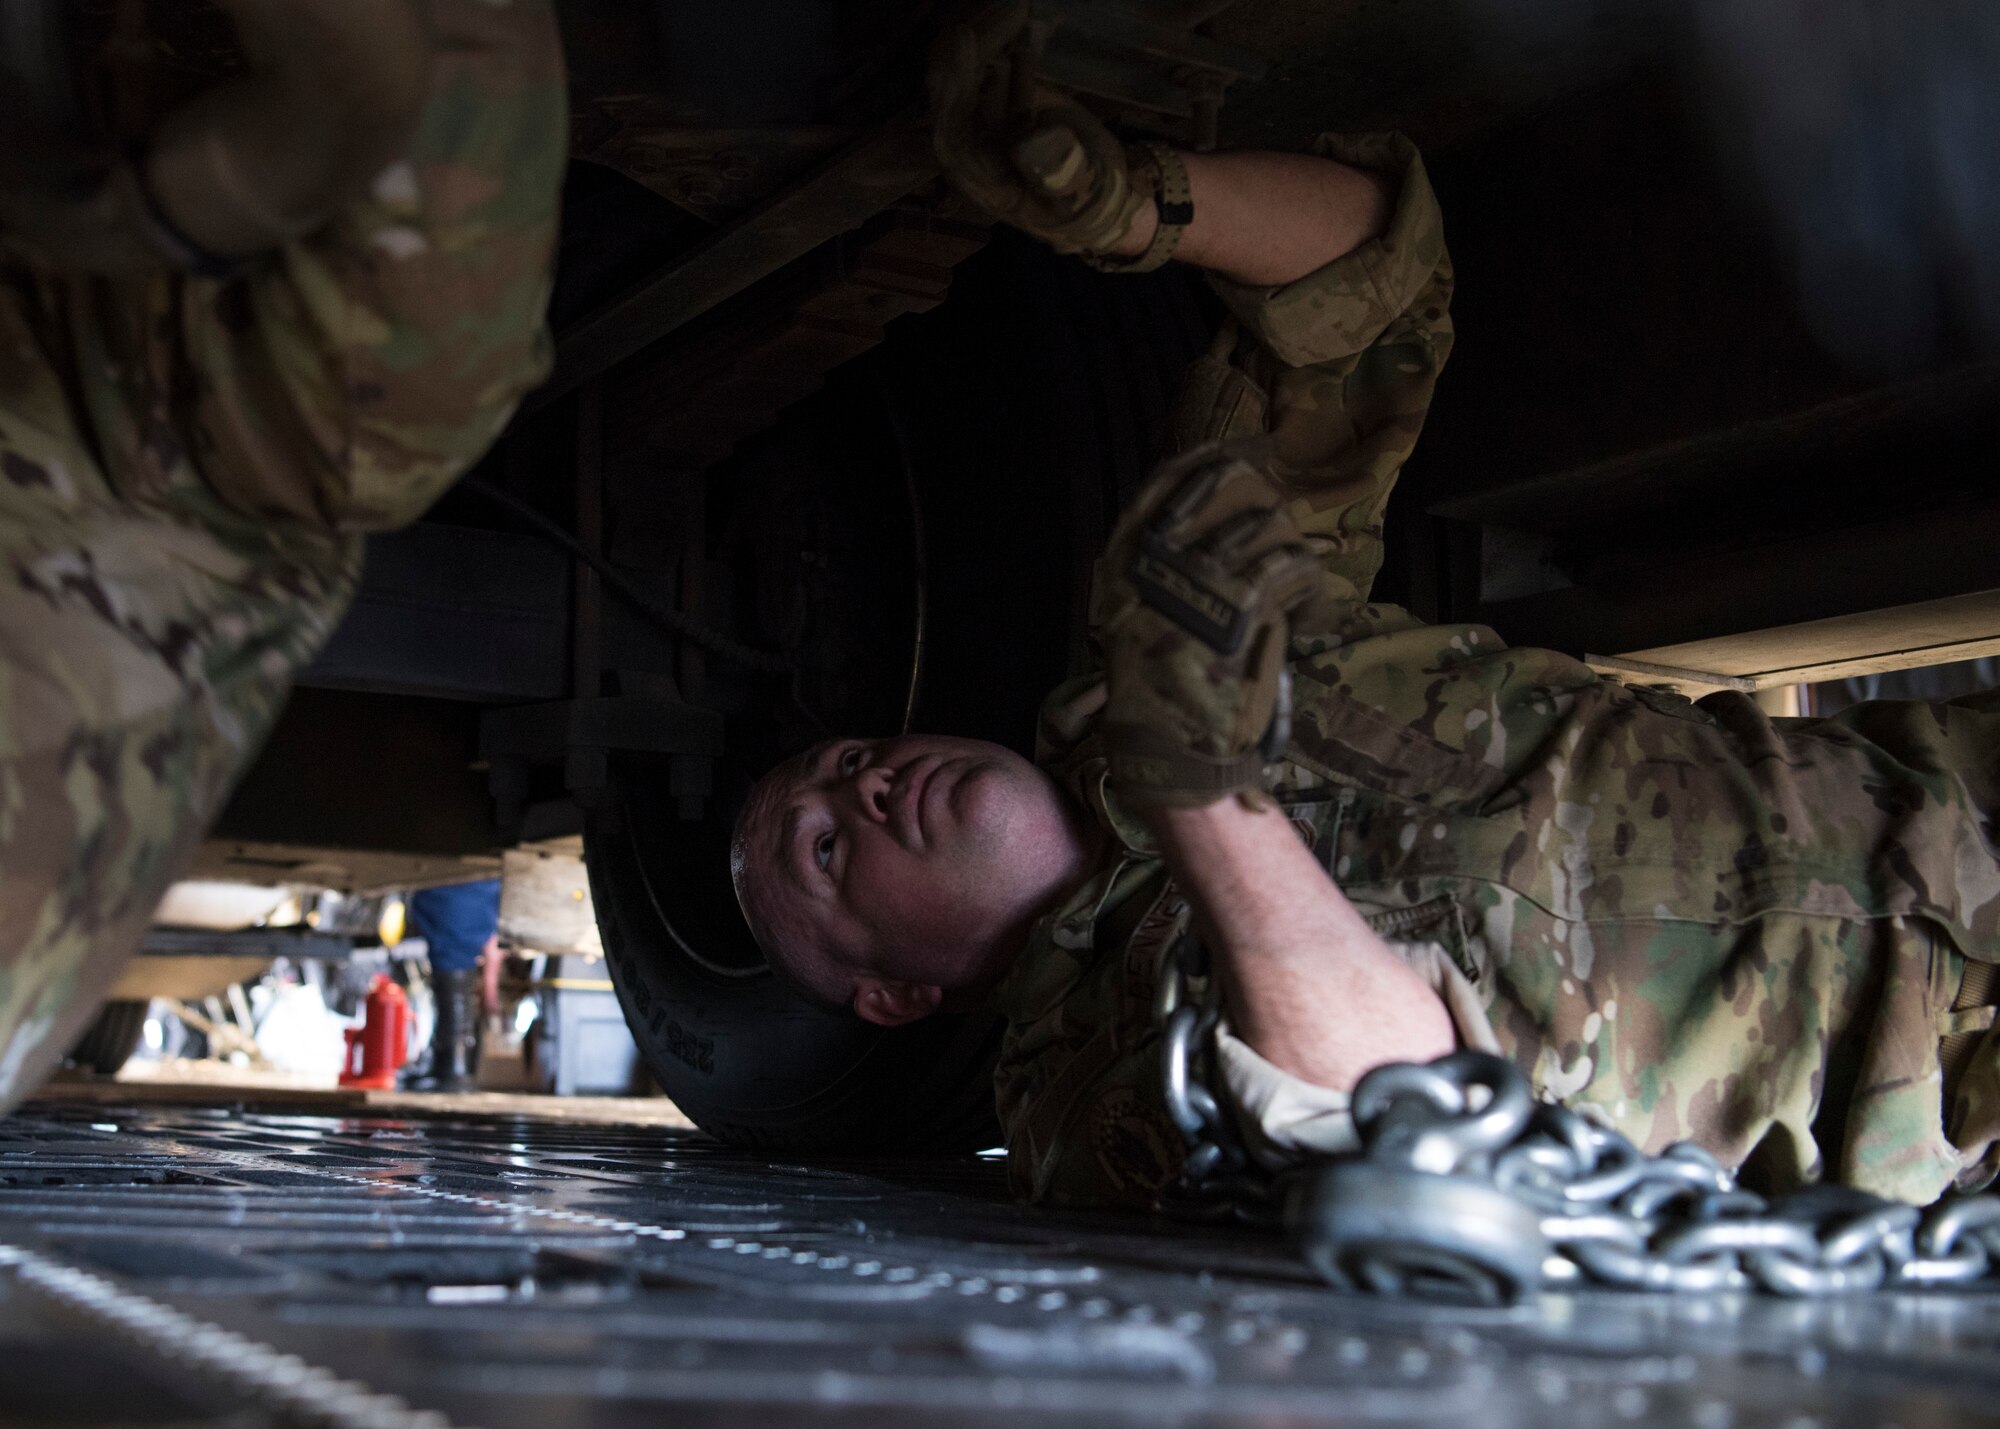 Tech. Sgt. Rodney Bennett, 89th Airlift Squadron loadmaster, secures a vehicle in a C-17 Globemaster III, assigned to Wright-Patterson Air Force Base, Ohio, during exercise Patriot Hook 2019, April 11, 2019, at Vandenberg Air Force Base, Calif. During the exercise, external players from Air Force Reserve Command, as well as Army Reserve and Coast Guard, tested their rapid disaster and medical response skills. Crewmembers, airfield managers, aerial porters and loadmasters aided in the movement of equipment and prepared cargo for a mock deployment. (U.S. Air Force photo by Airman 1st Class Aubree Milks)